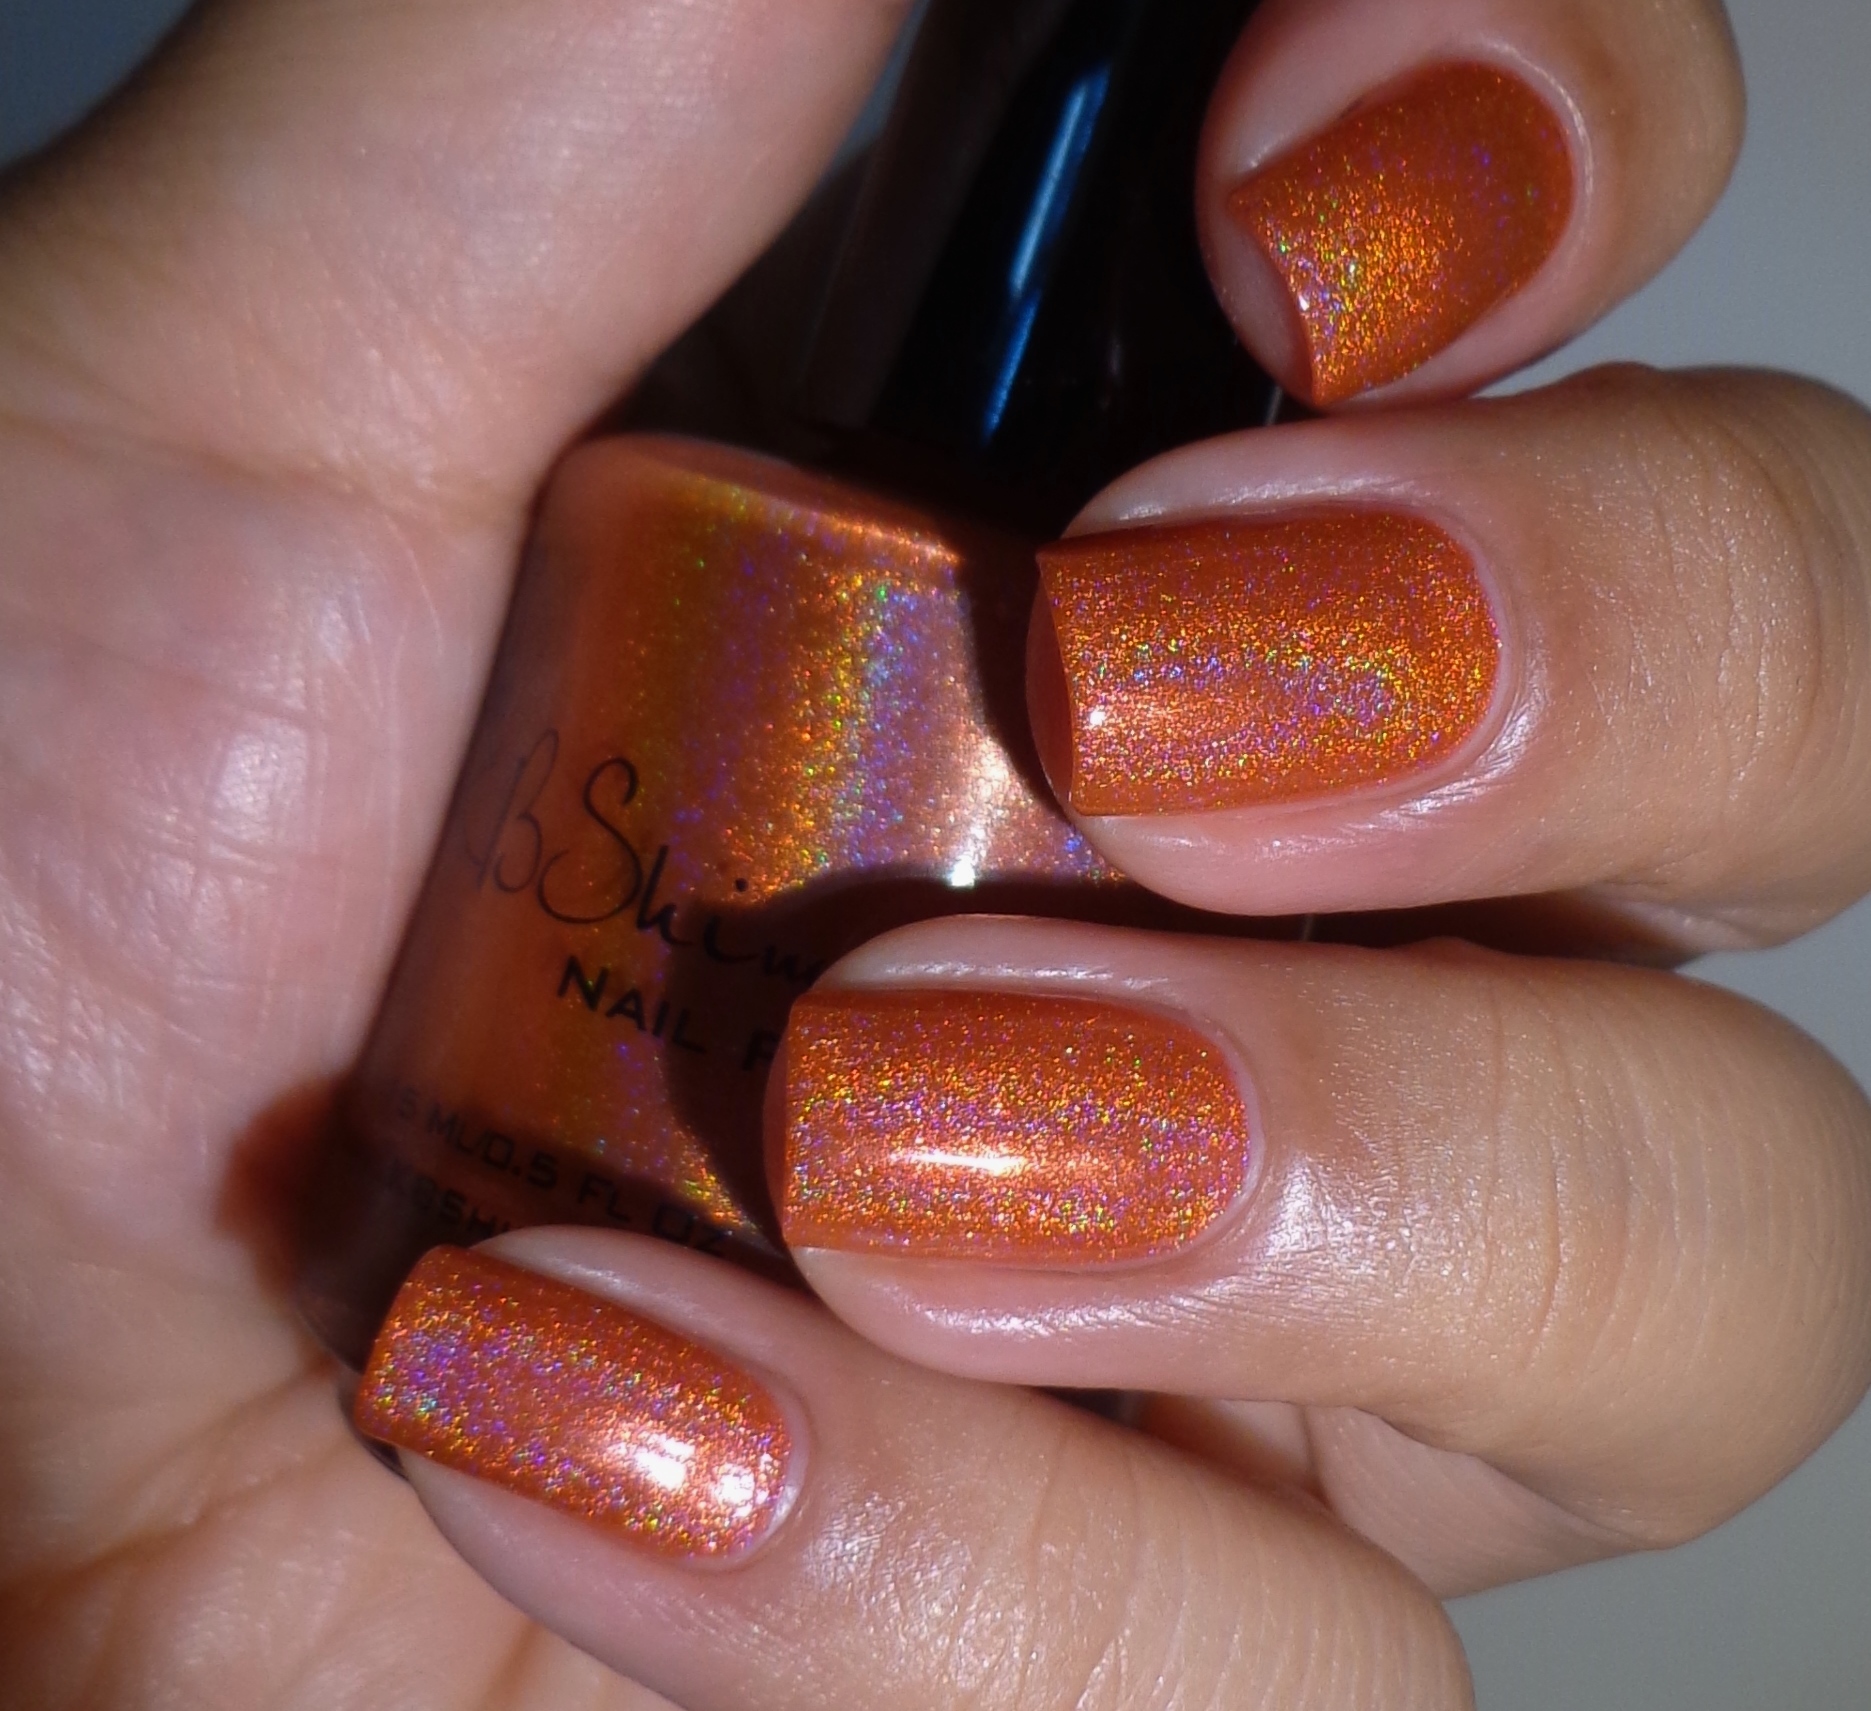 KBShimmer Rust No One 2